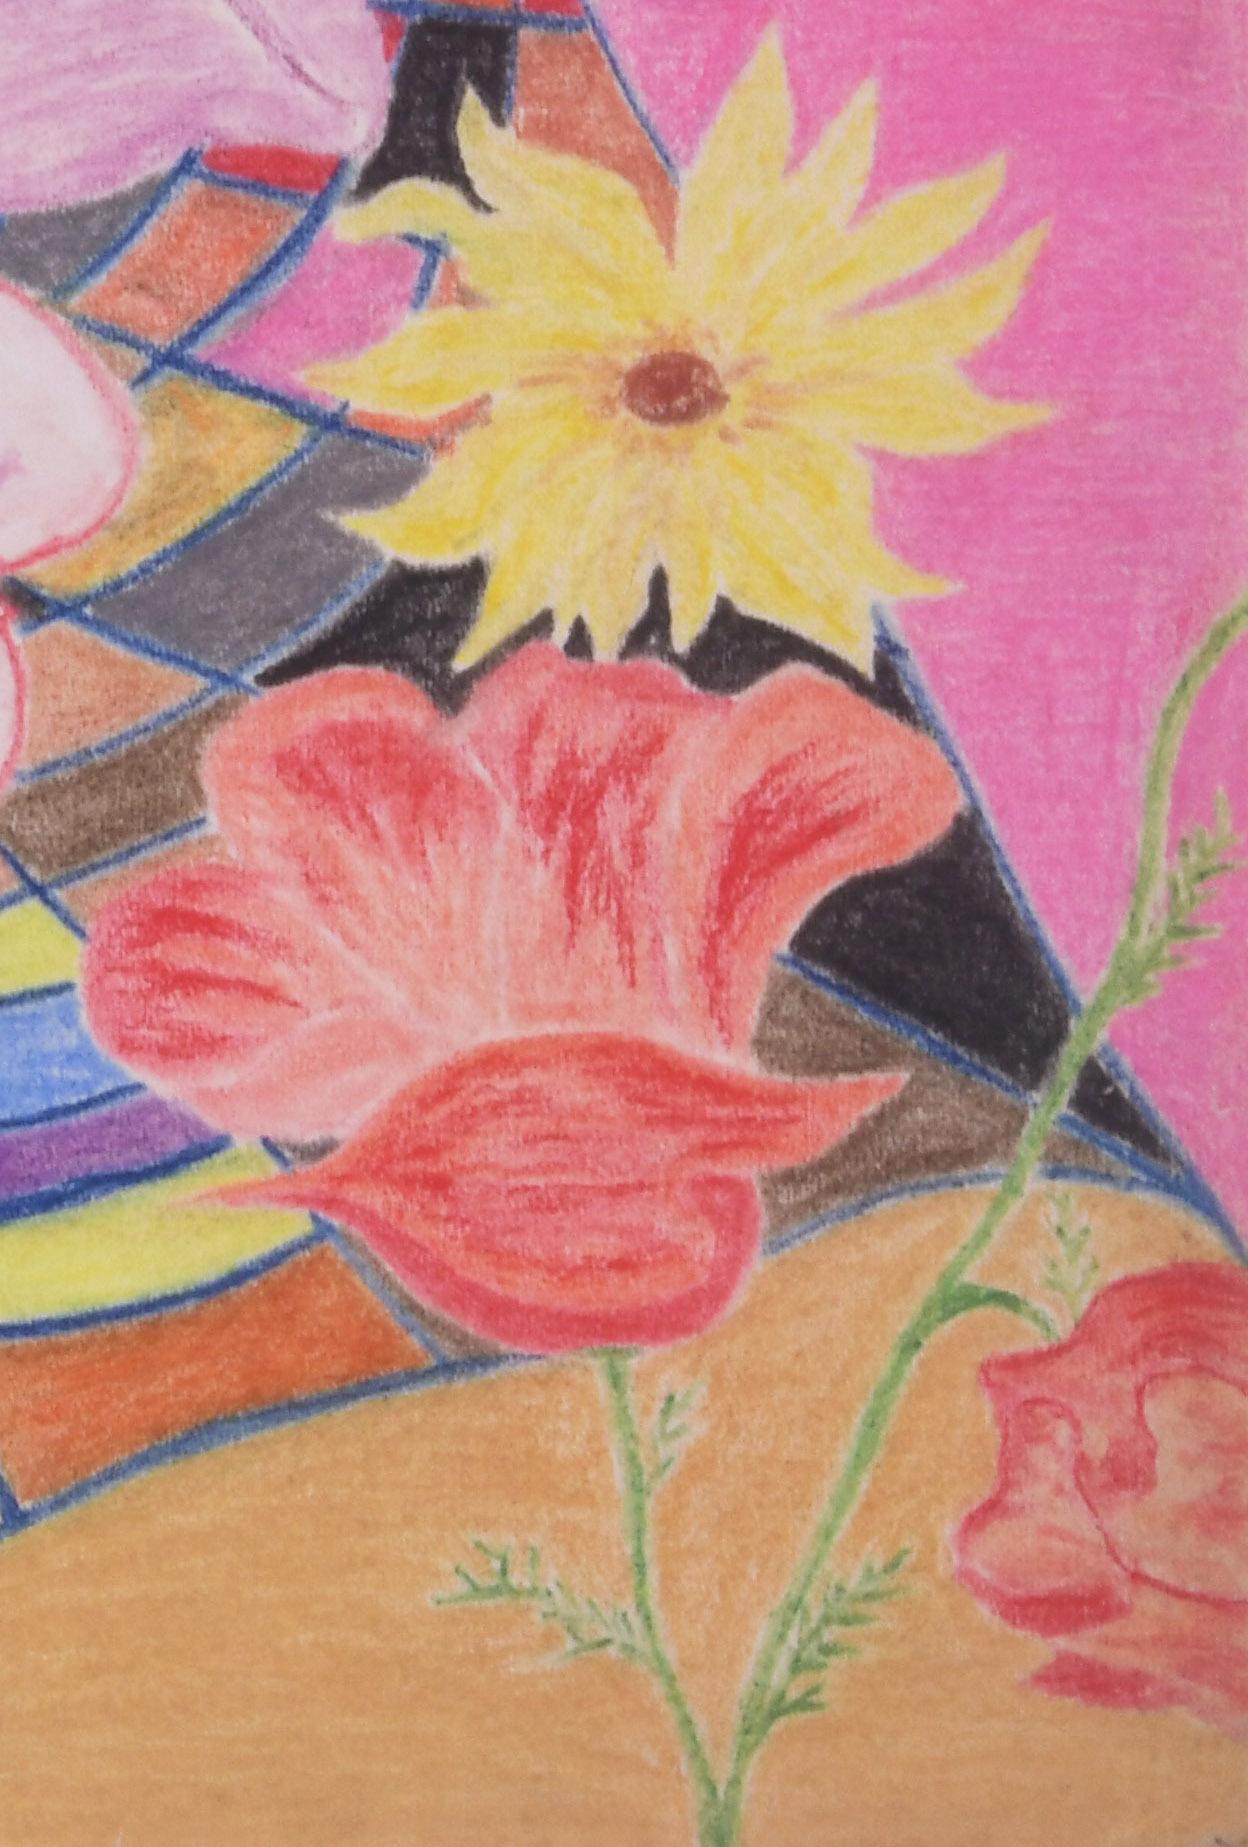 Aka Beni Kosh
Still Life with Flowers
Colored pencil on paper
Unsigned
Signed with the estate stamp on reverse (see photo)
     Estate No. 716
Condition: Soft fold through image, wrinkles to sheet
Sheet size: 19 x 25 inches
Provenance: Estate of the